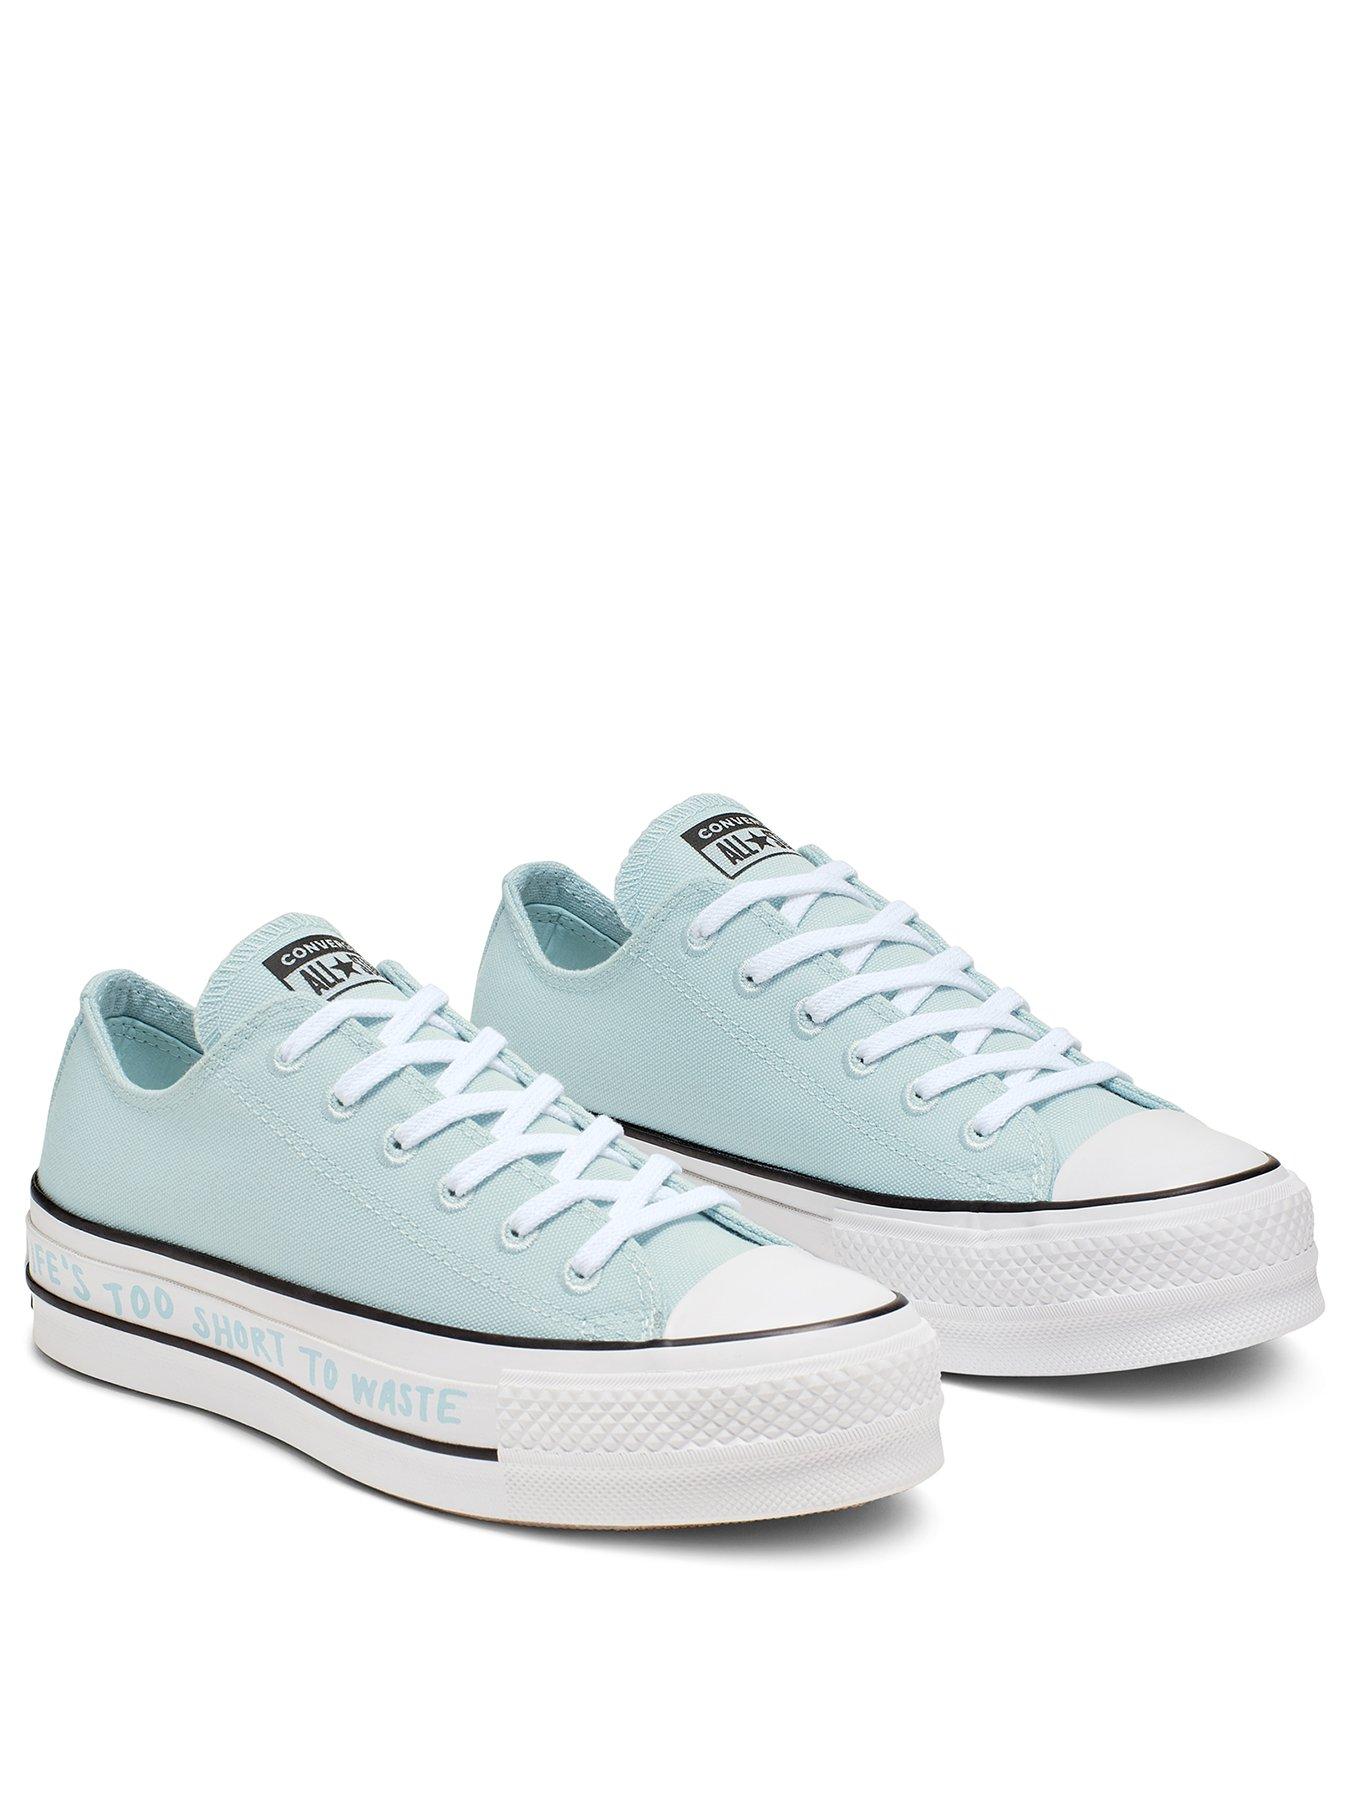 converse all star ox low platform white canvas